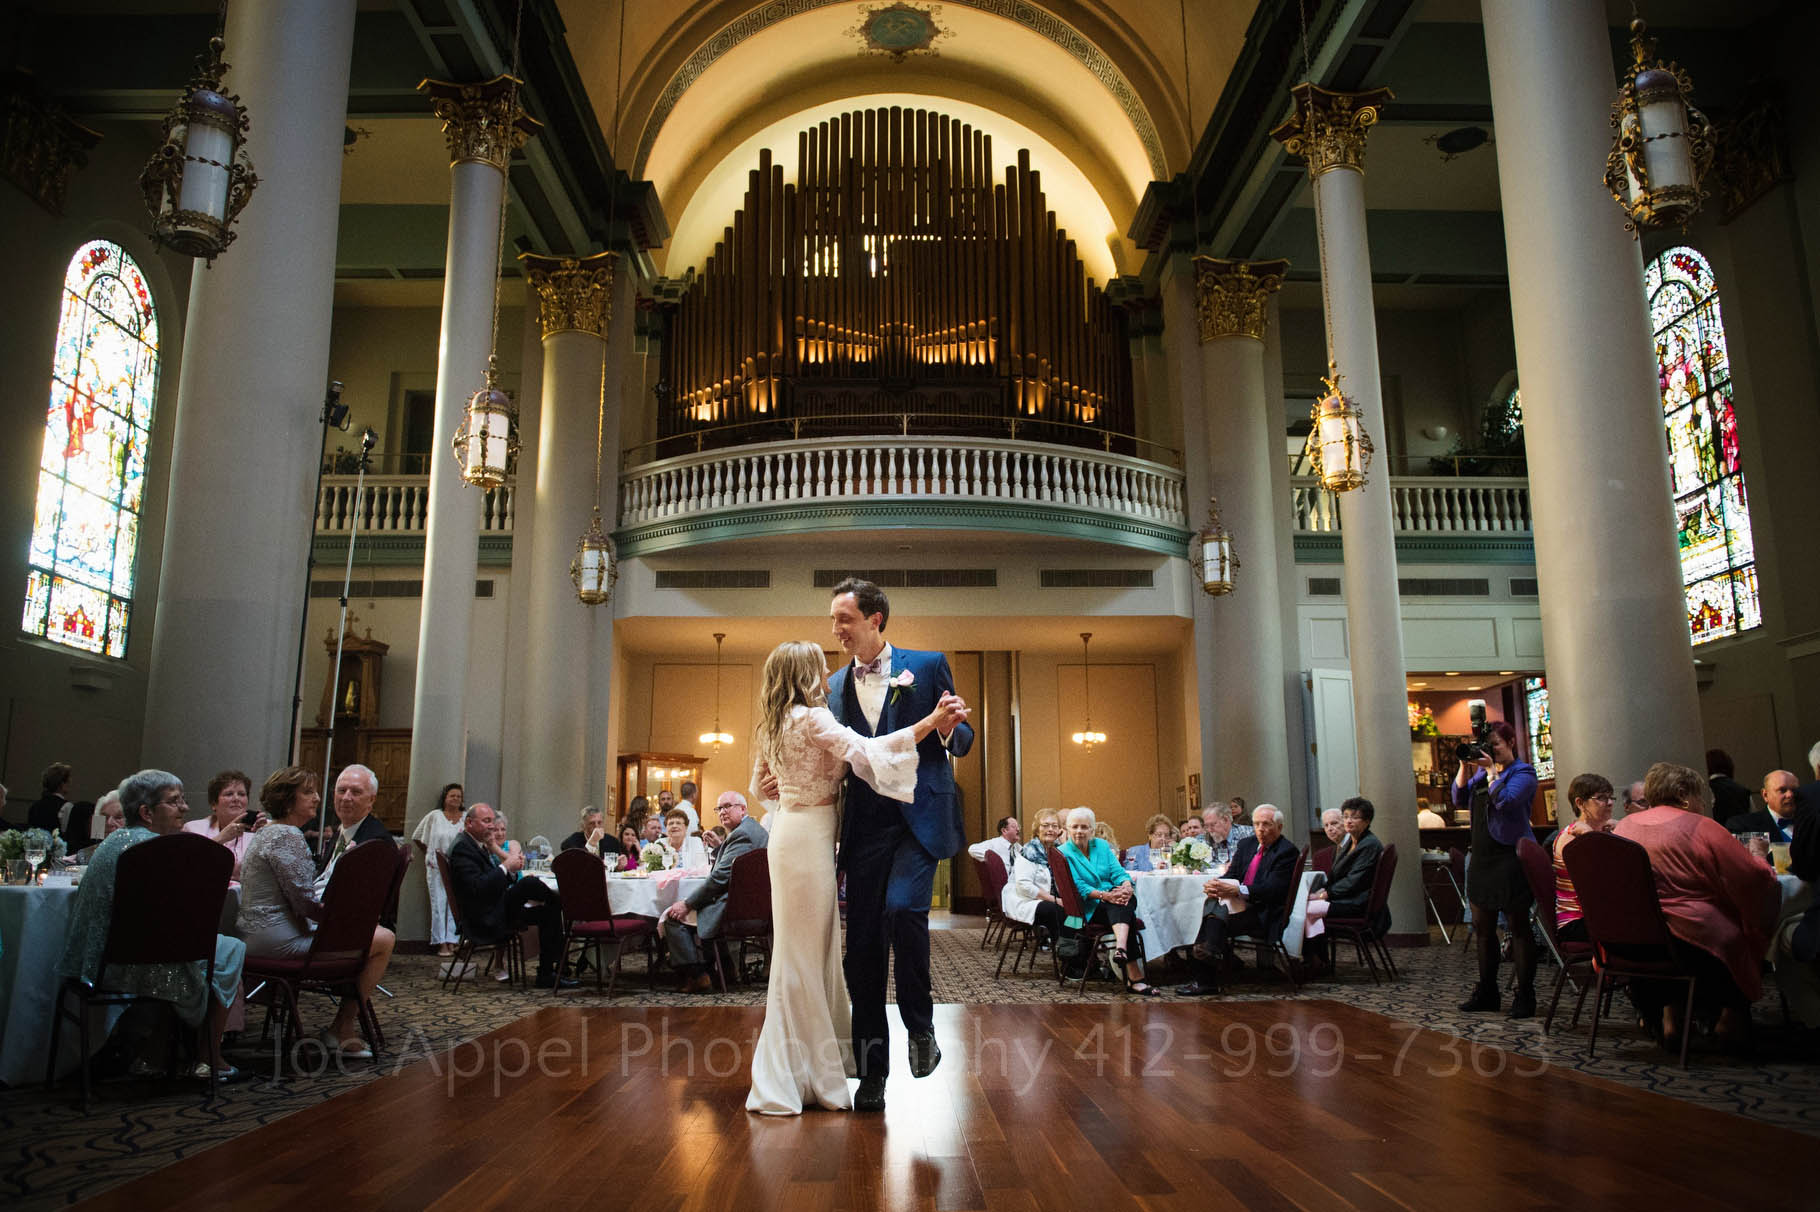 Groom raises his left foot into the air as he and his bride share their first dance during their Pittsburgh Grand Hall Wedding. The dance floor is in the center of the room with stained glass windows on either side and a large, backlit pipe organ in the loft above them.